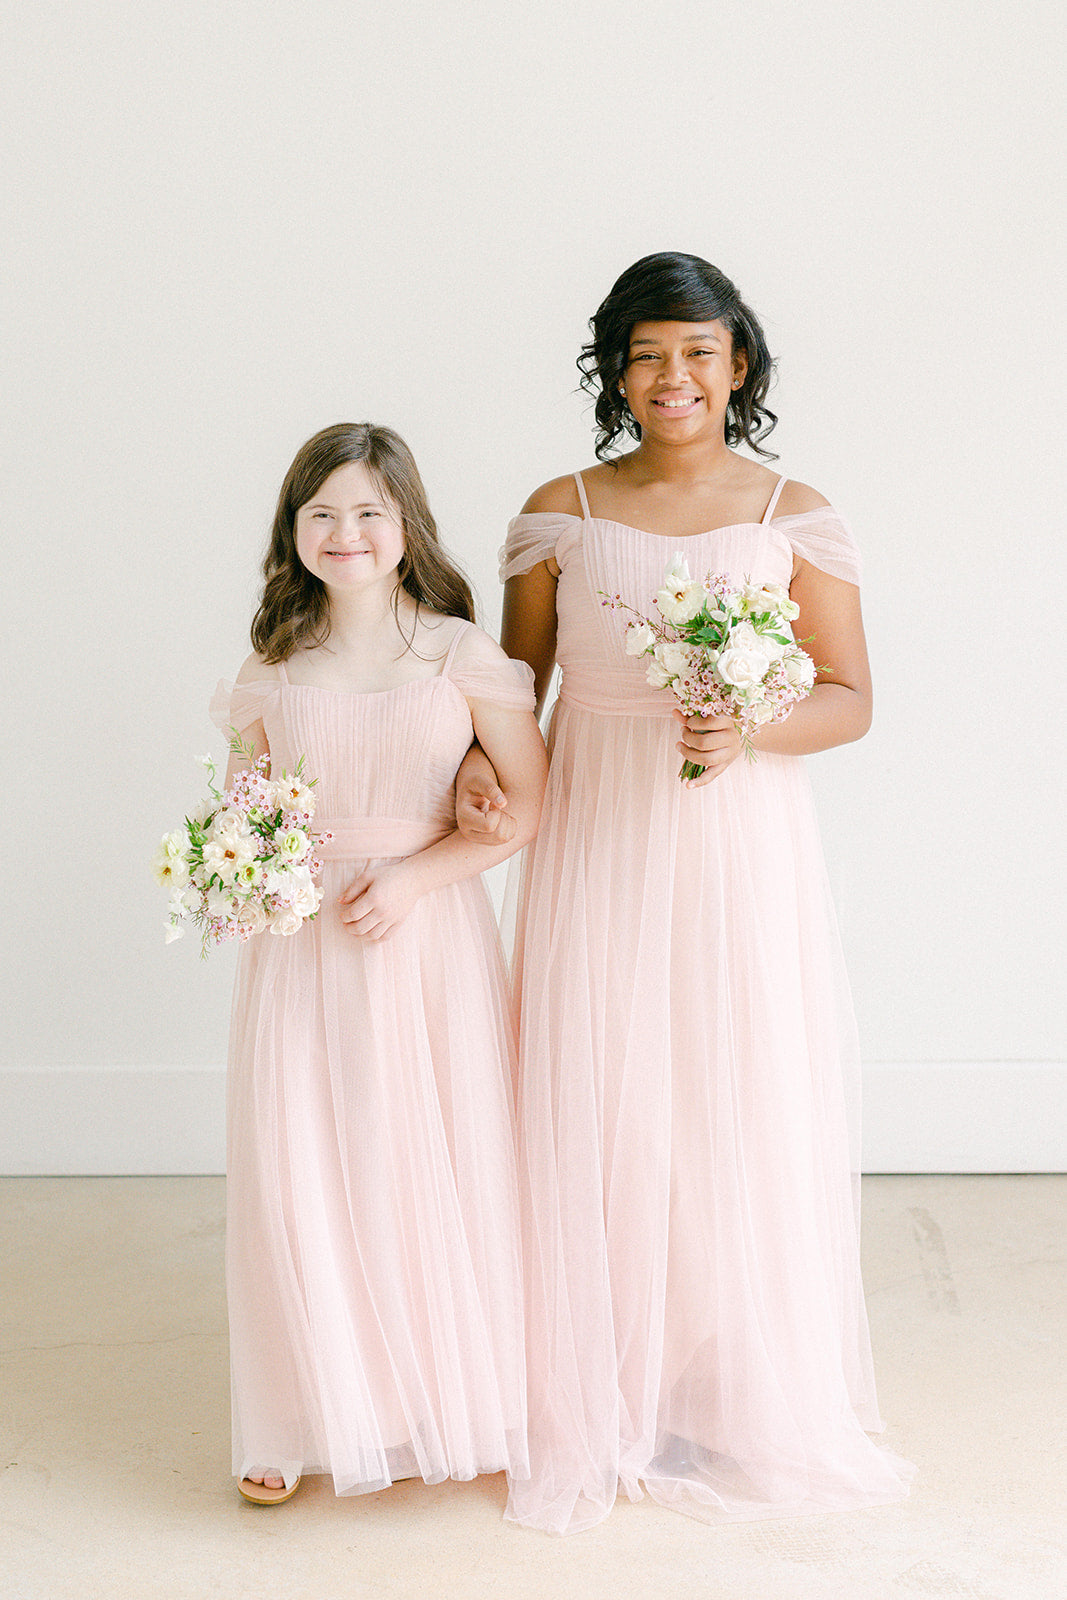 Do Bridesmaid Dresses Run Small? I Found Out The Hard Way